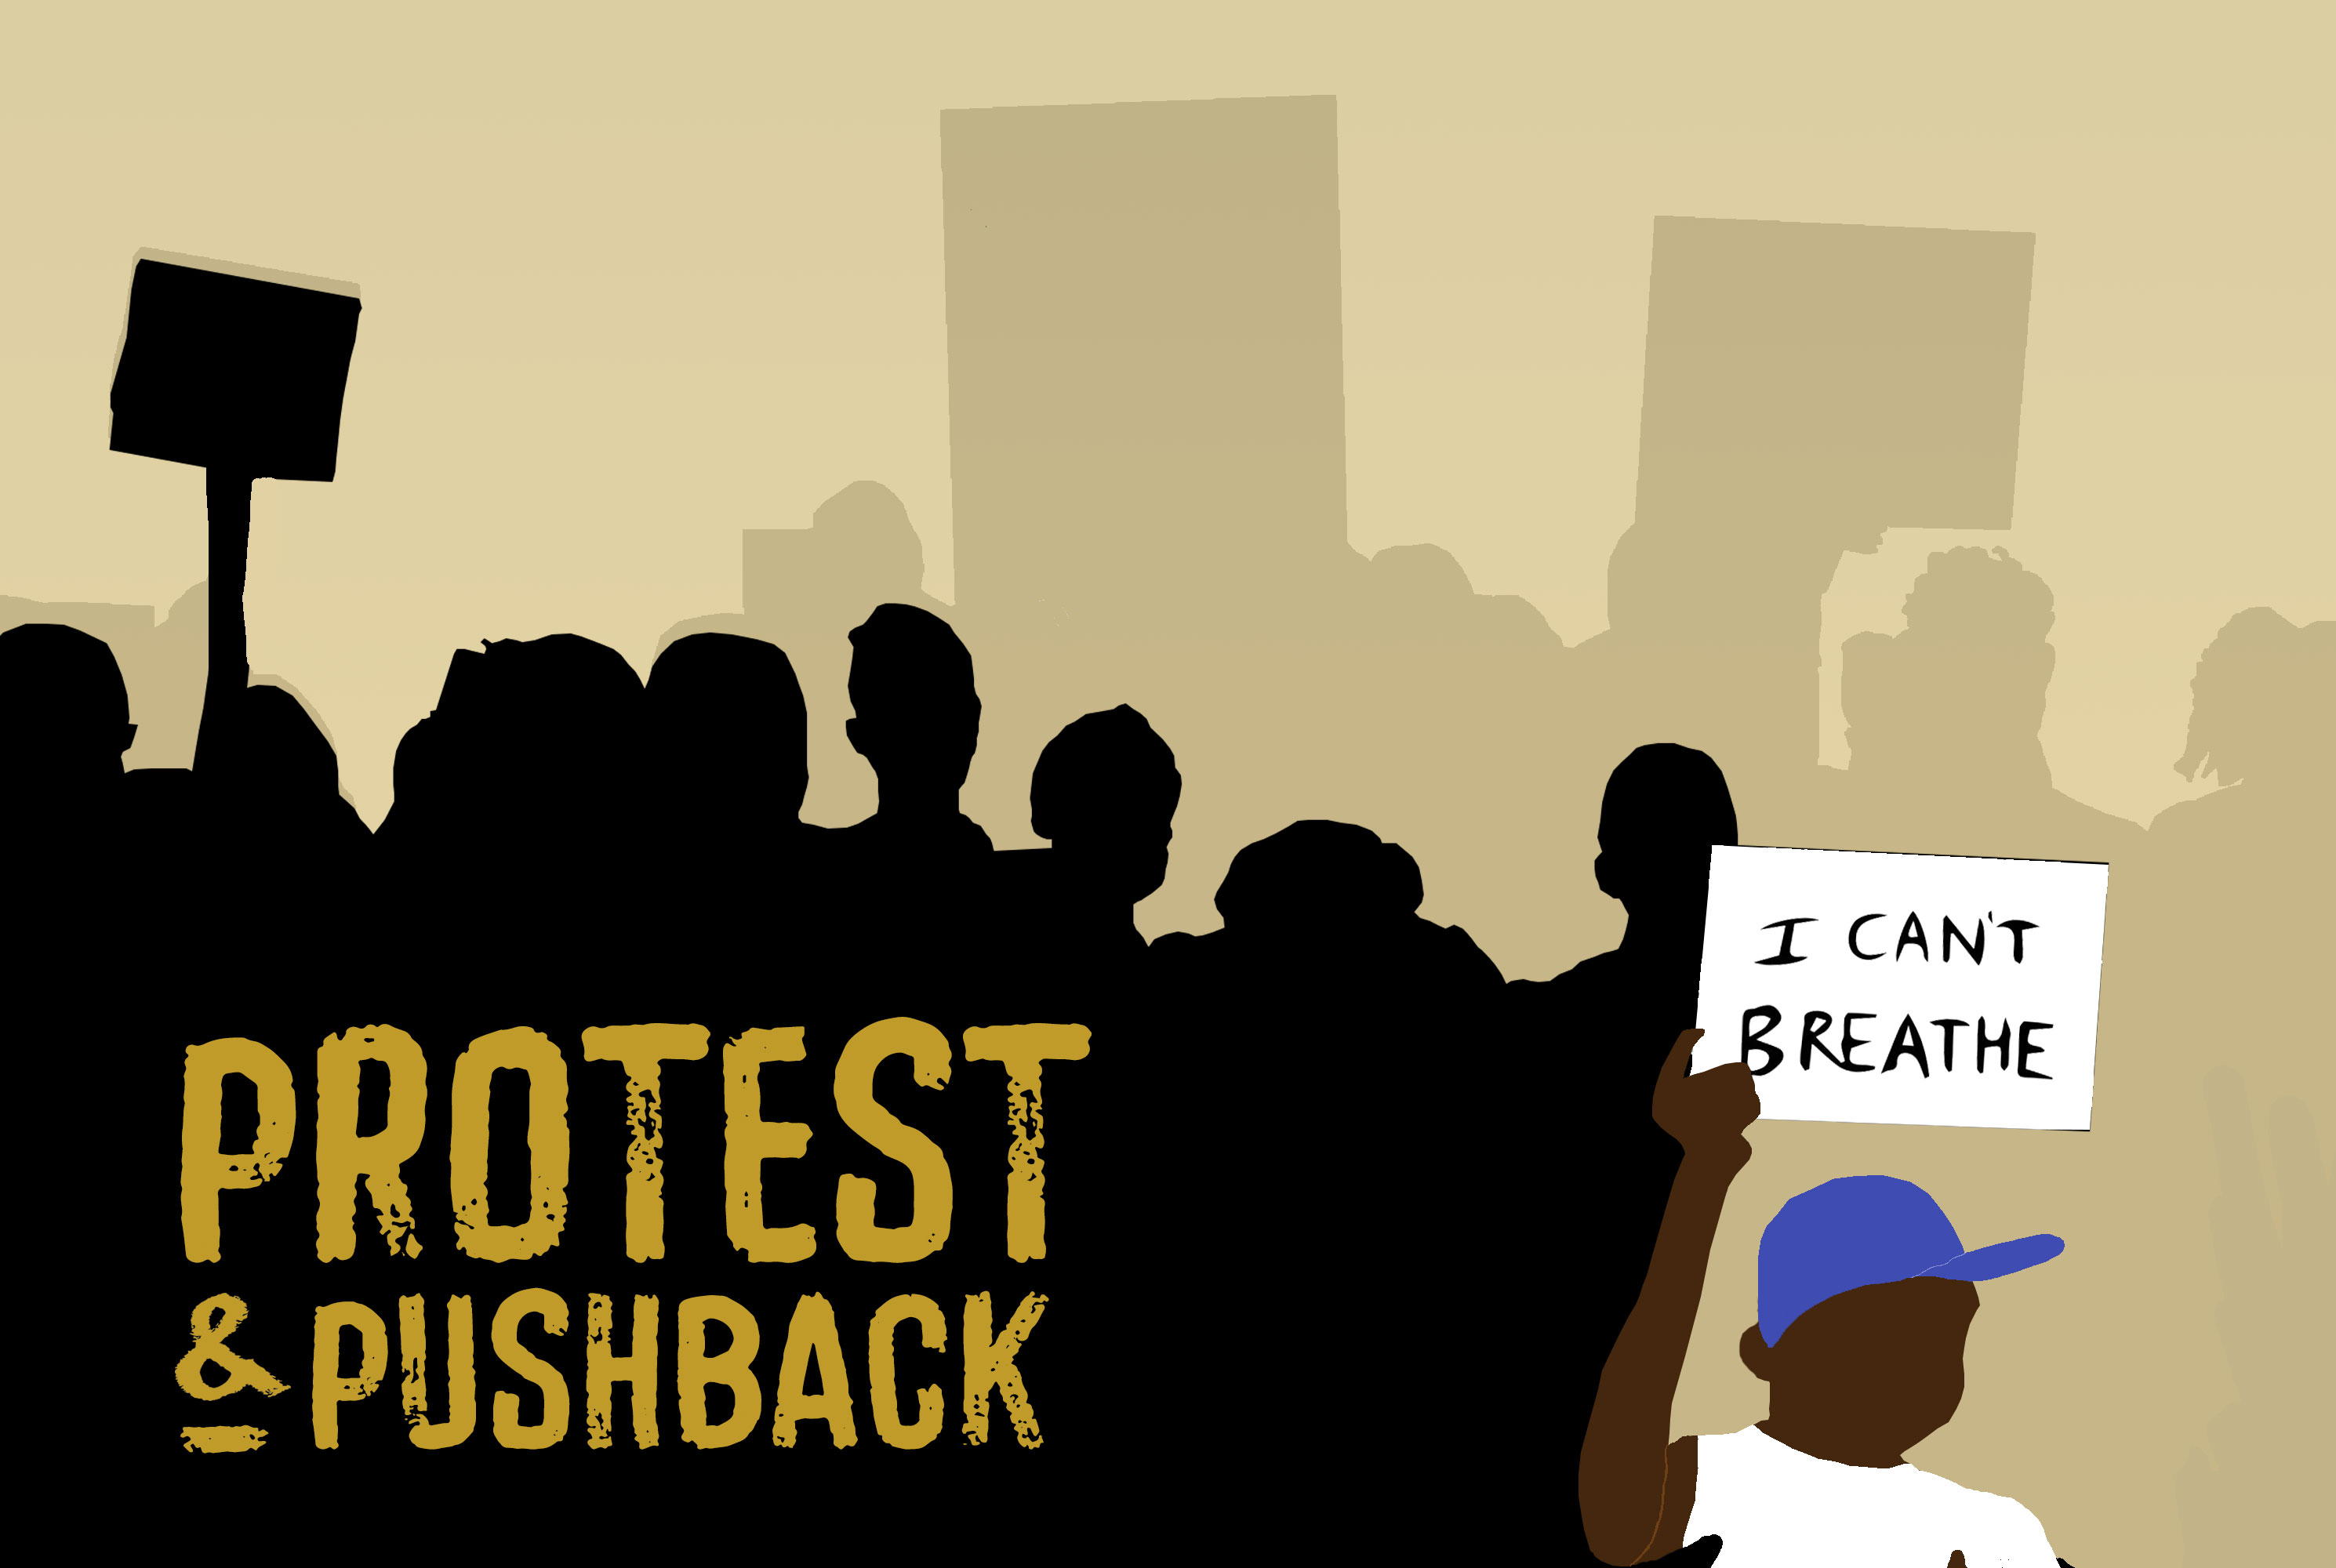 Color illustration of a Black male Black Lives Matter protester in the foreground holding a sign which reads, 'I CAN'T BREATHE' with a shadowy crowd of other protesters in the background.